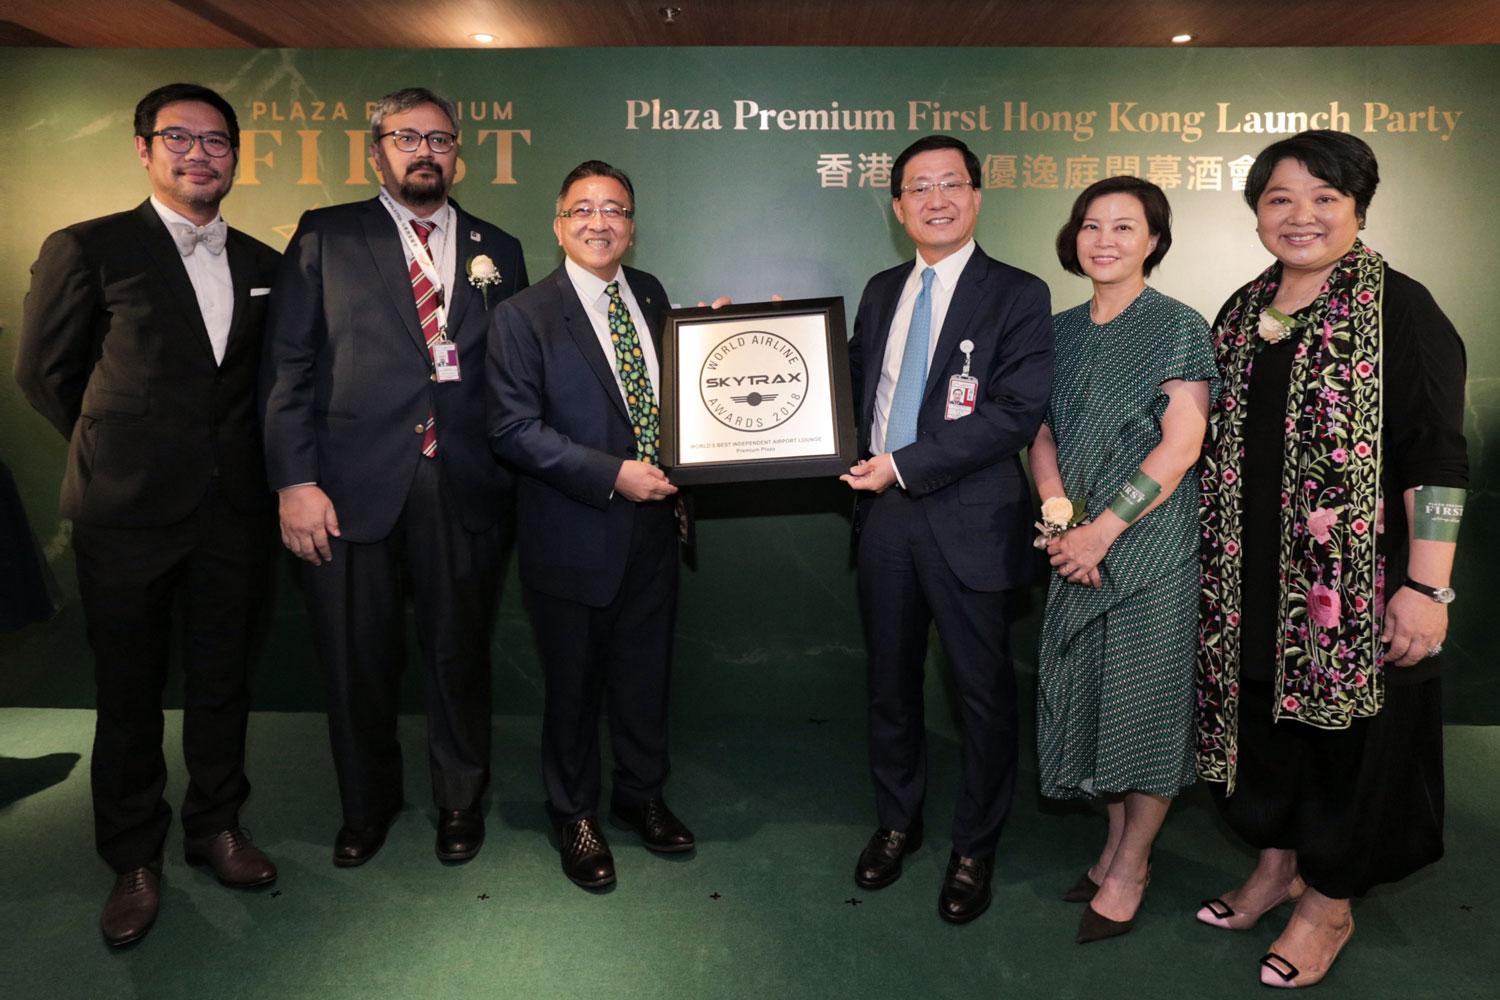 Mr. Song Hoi-see (centre left), Founder and Chief Executive Officer of Plaza Premium Group, Mr. Fred Lam (centre right), Chief Executive Officer of Hong Kong Airport Authority, and officiating guests presented Plaza Premium Group’s “World’s Best Independent Airport Lounge” award by Skytrax at the Plaza Premium First Hong Kong Launch Party.